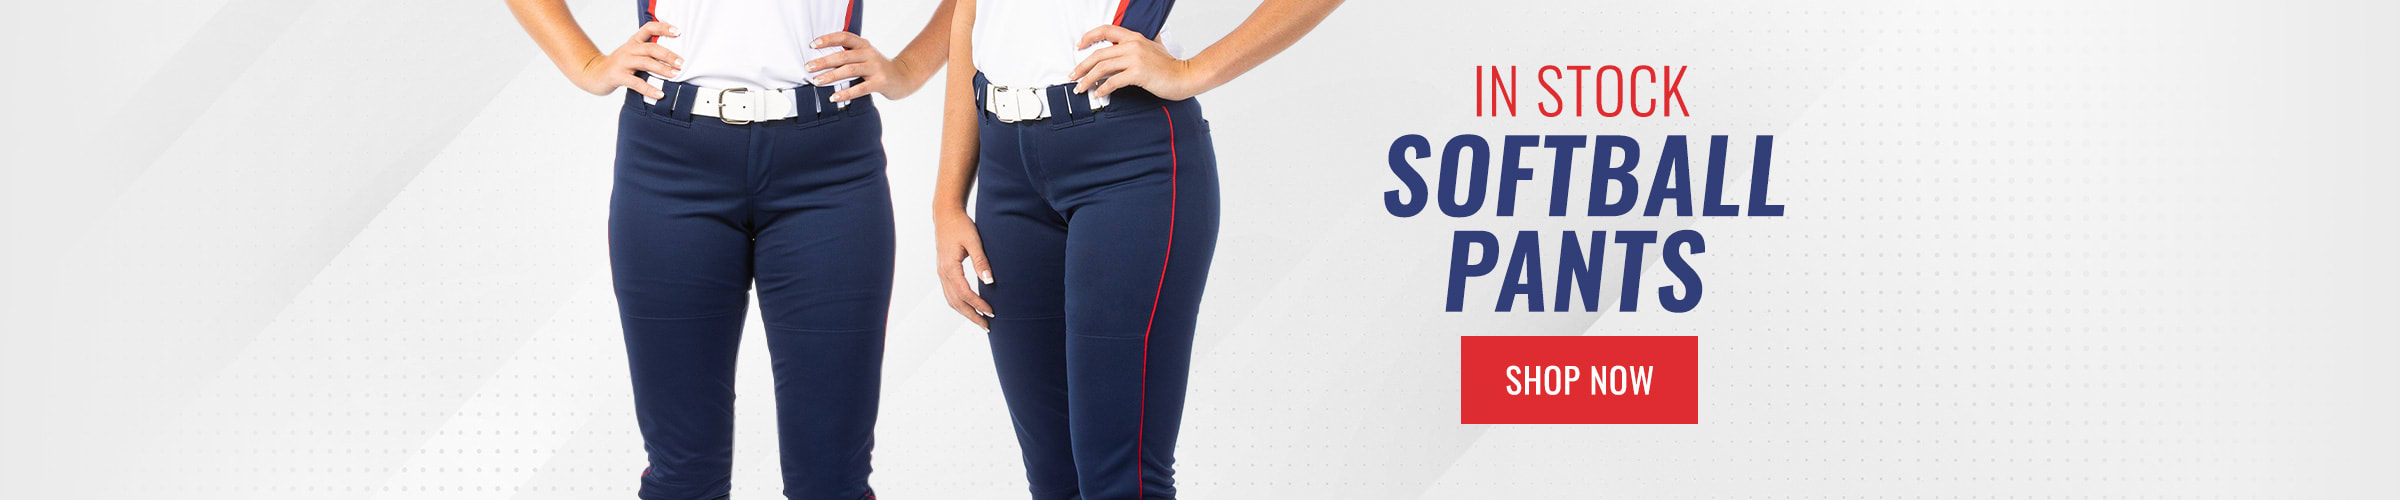 In Stock Softball Pants - Shop Now